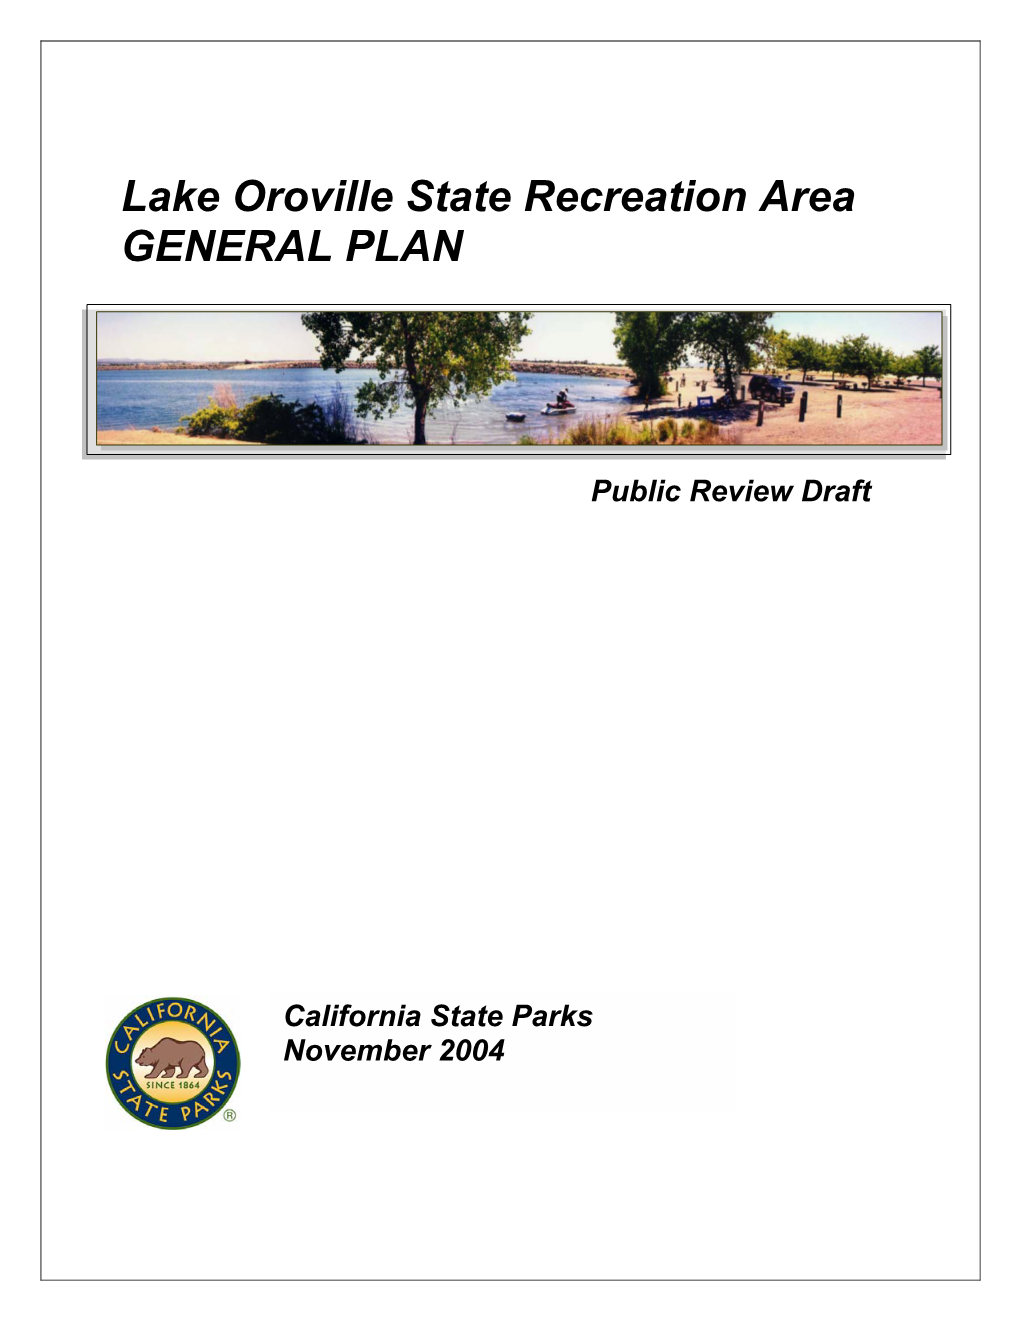 Lake Oroville State Recreation Area GENERAL PLAN